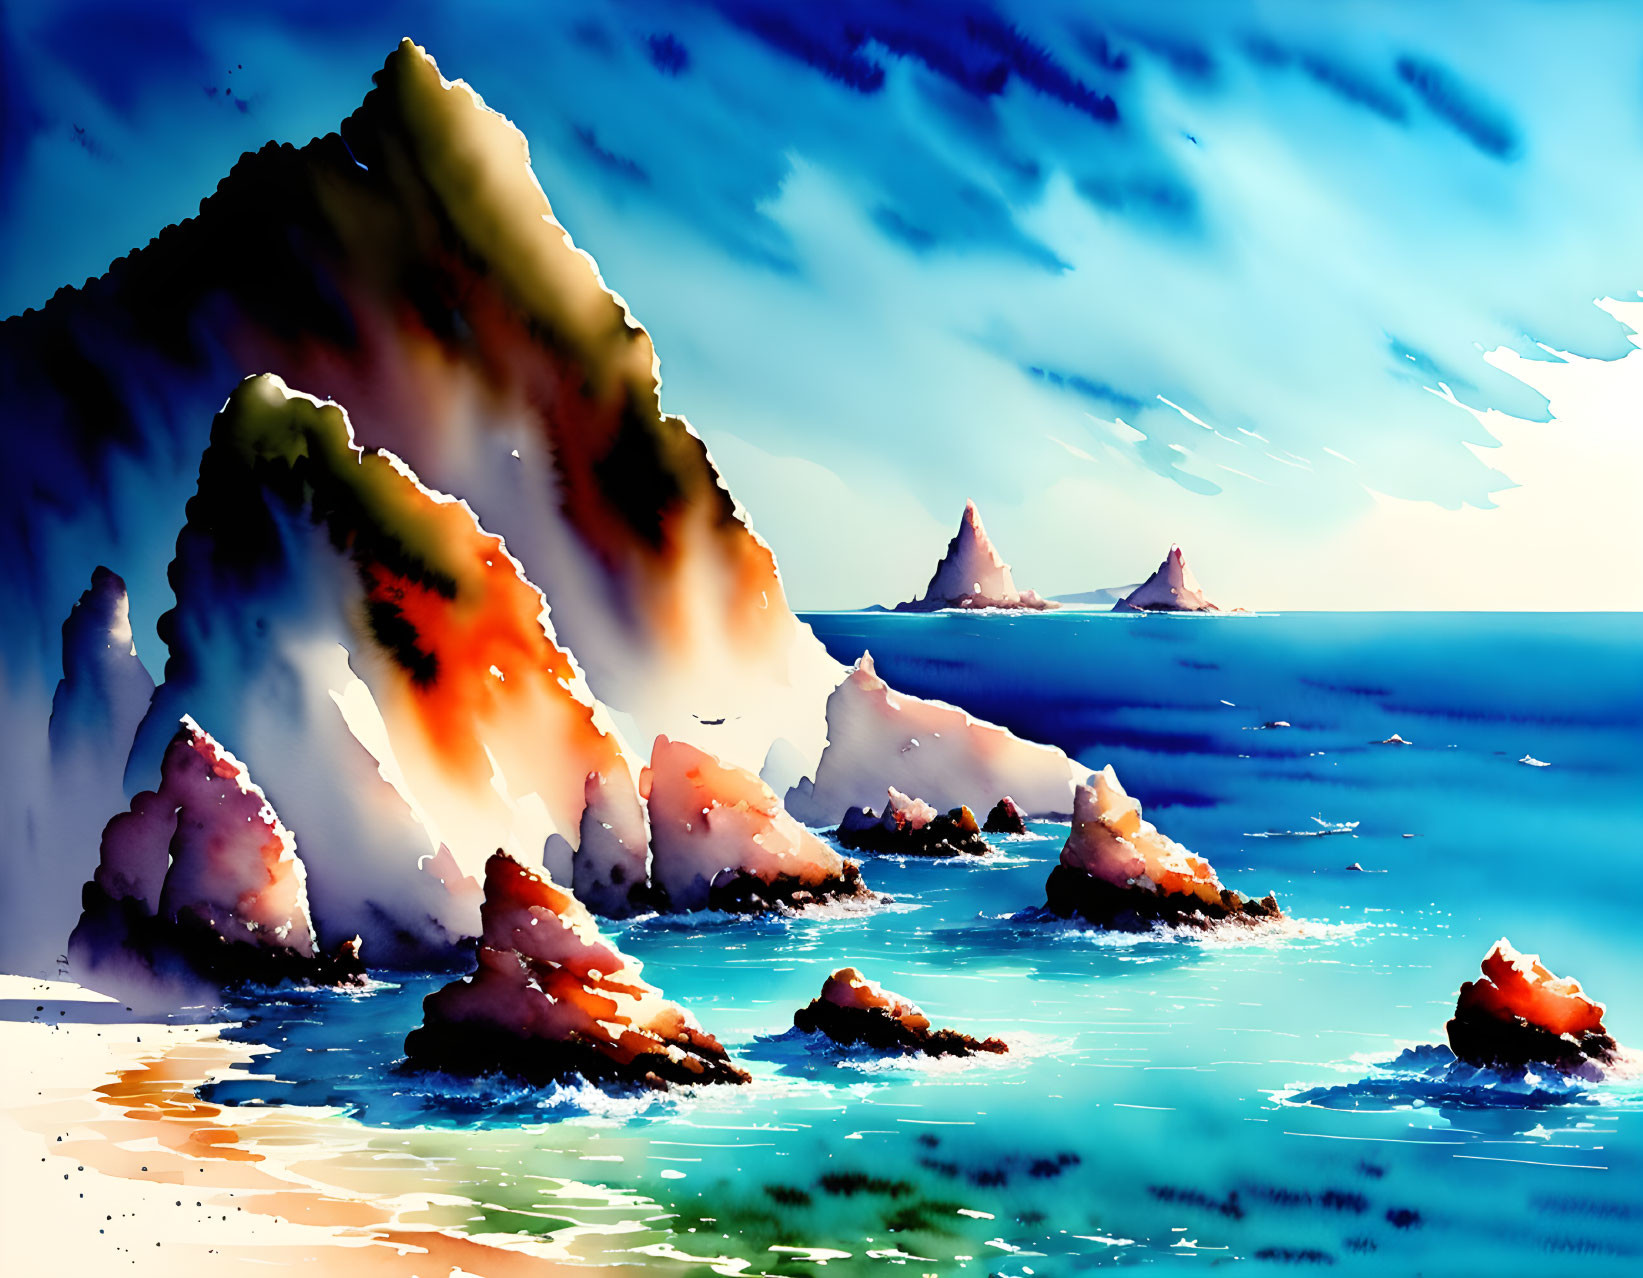 Coastal Scene Digital Painting with Rock Formations and Blue Sky